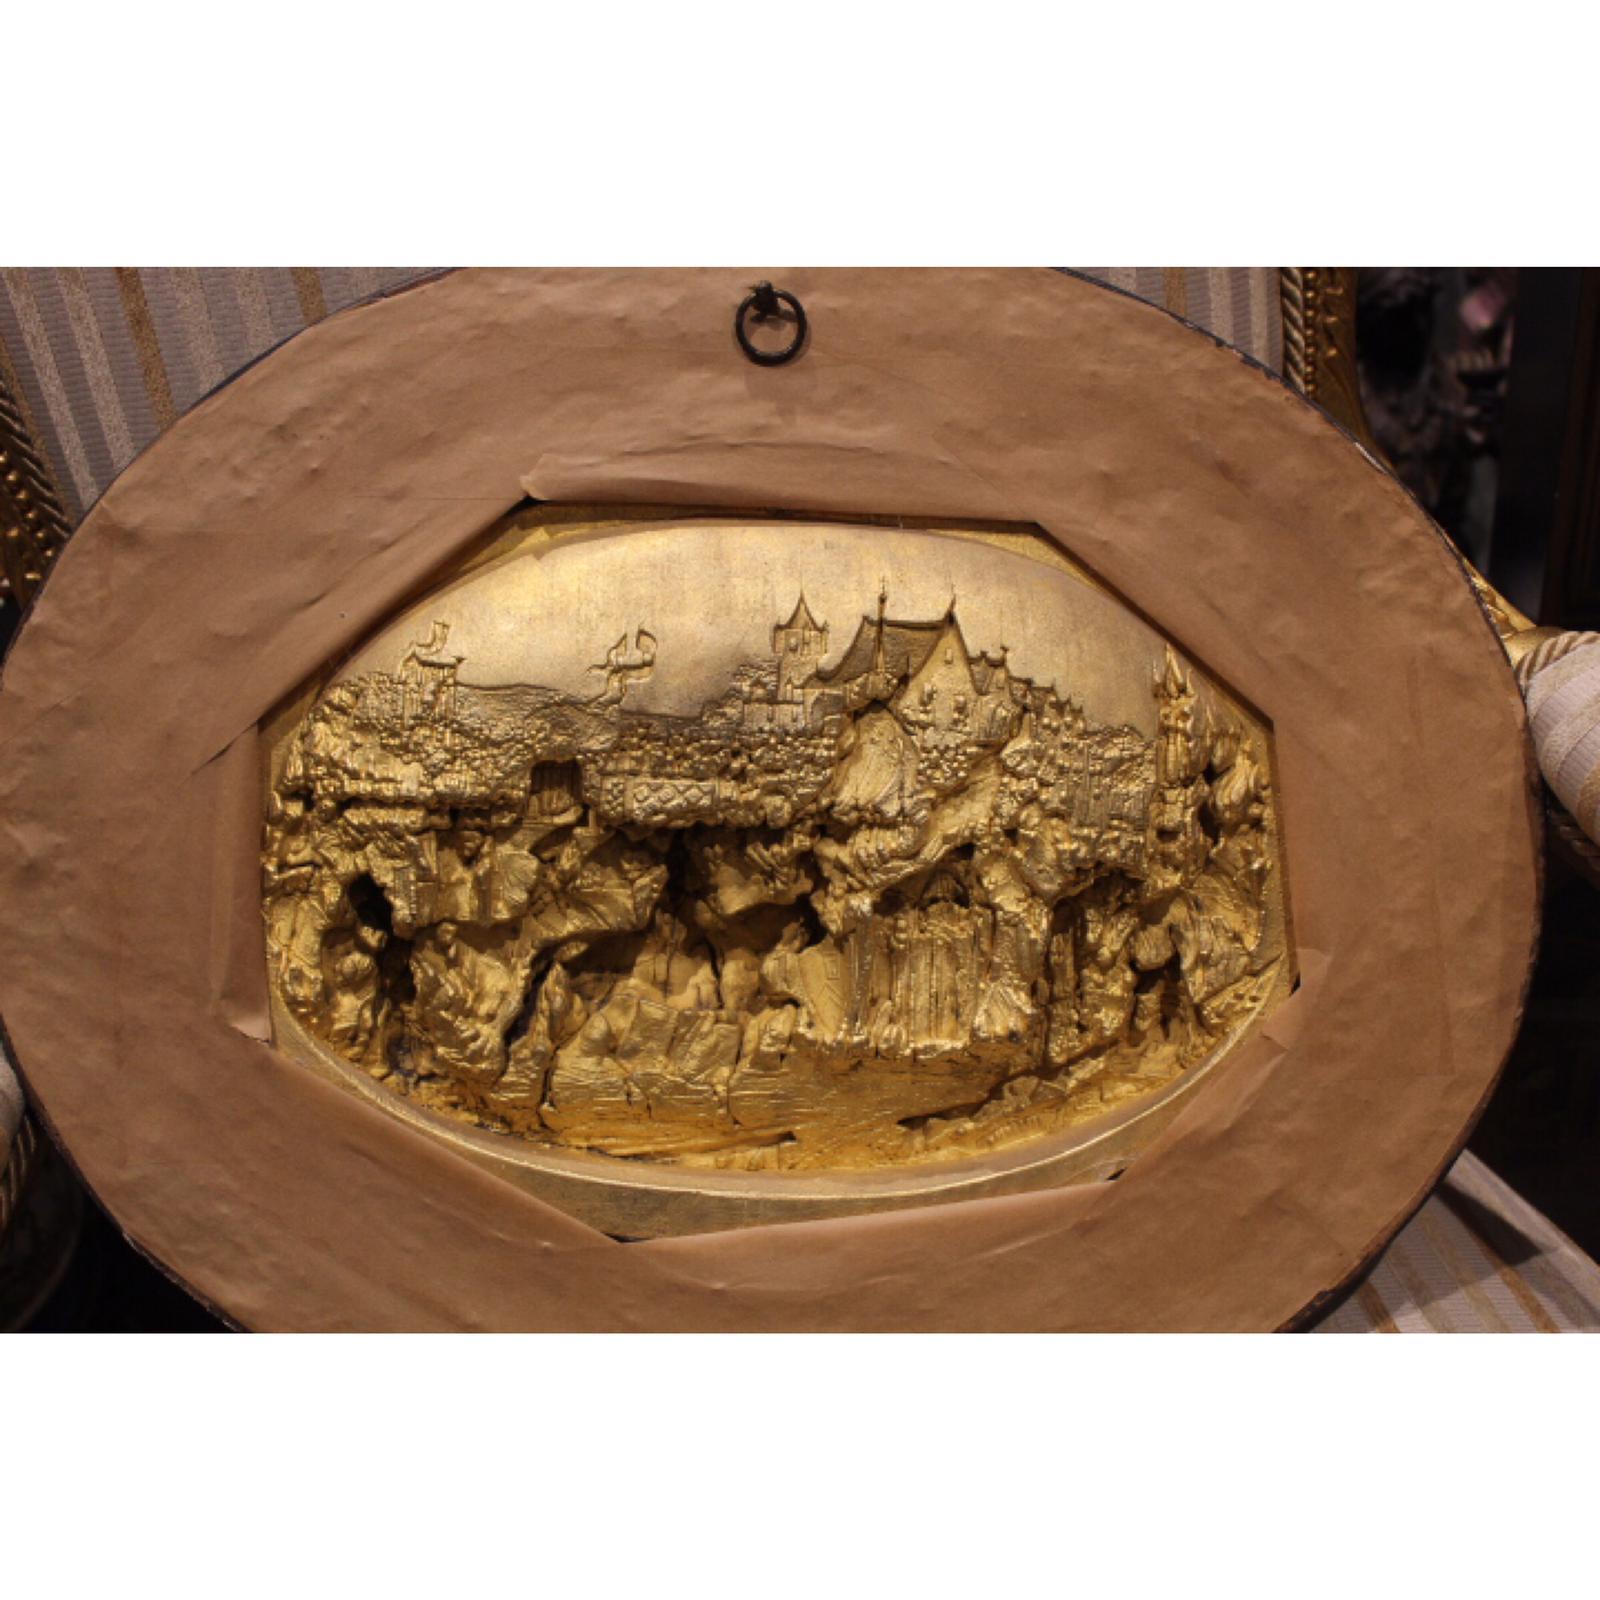 A large hand carved meerschaum bas relief plaque by Justin Mathieu; the scene shows Joan of Arc with her troops. The carving is intricate and very detailed. Meerschaum is a form of mineral known as sepiolite; it is sometimes found floating on the